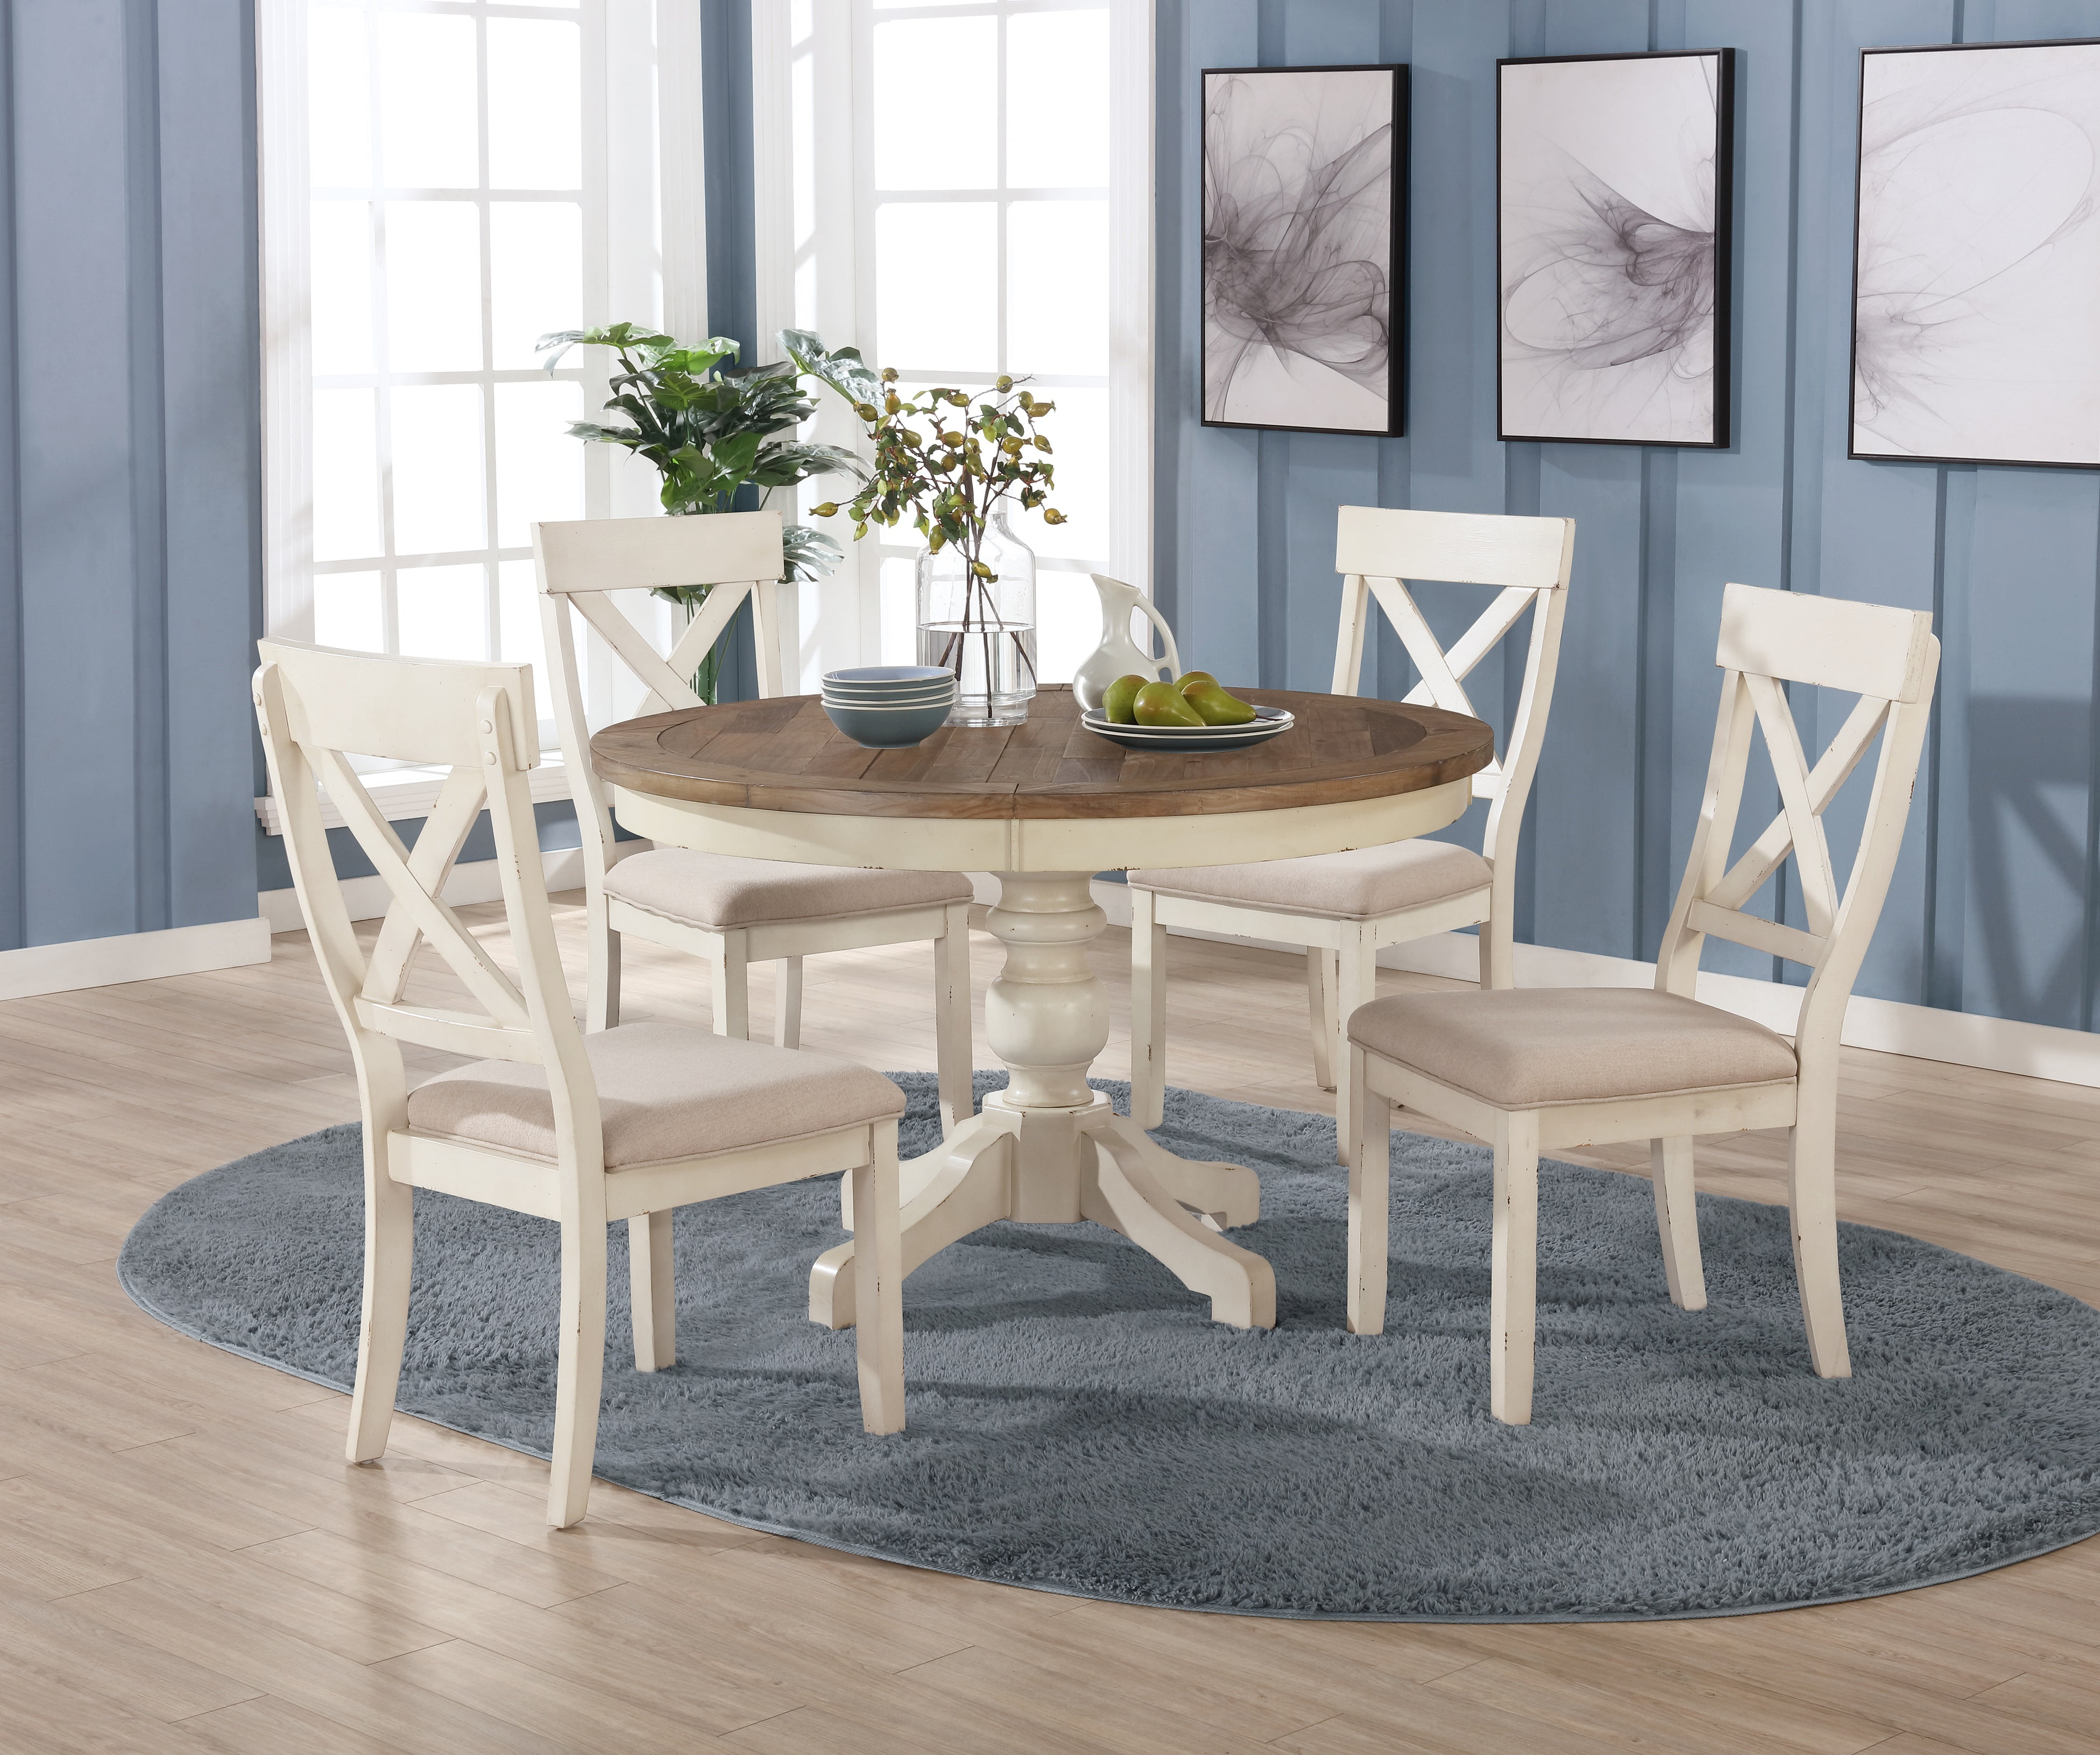 Roundhill Furniture Prato 5-Piece Round Dining Table Set with Cross